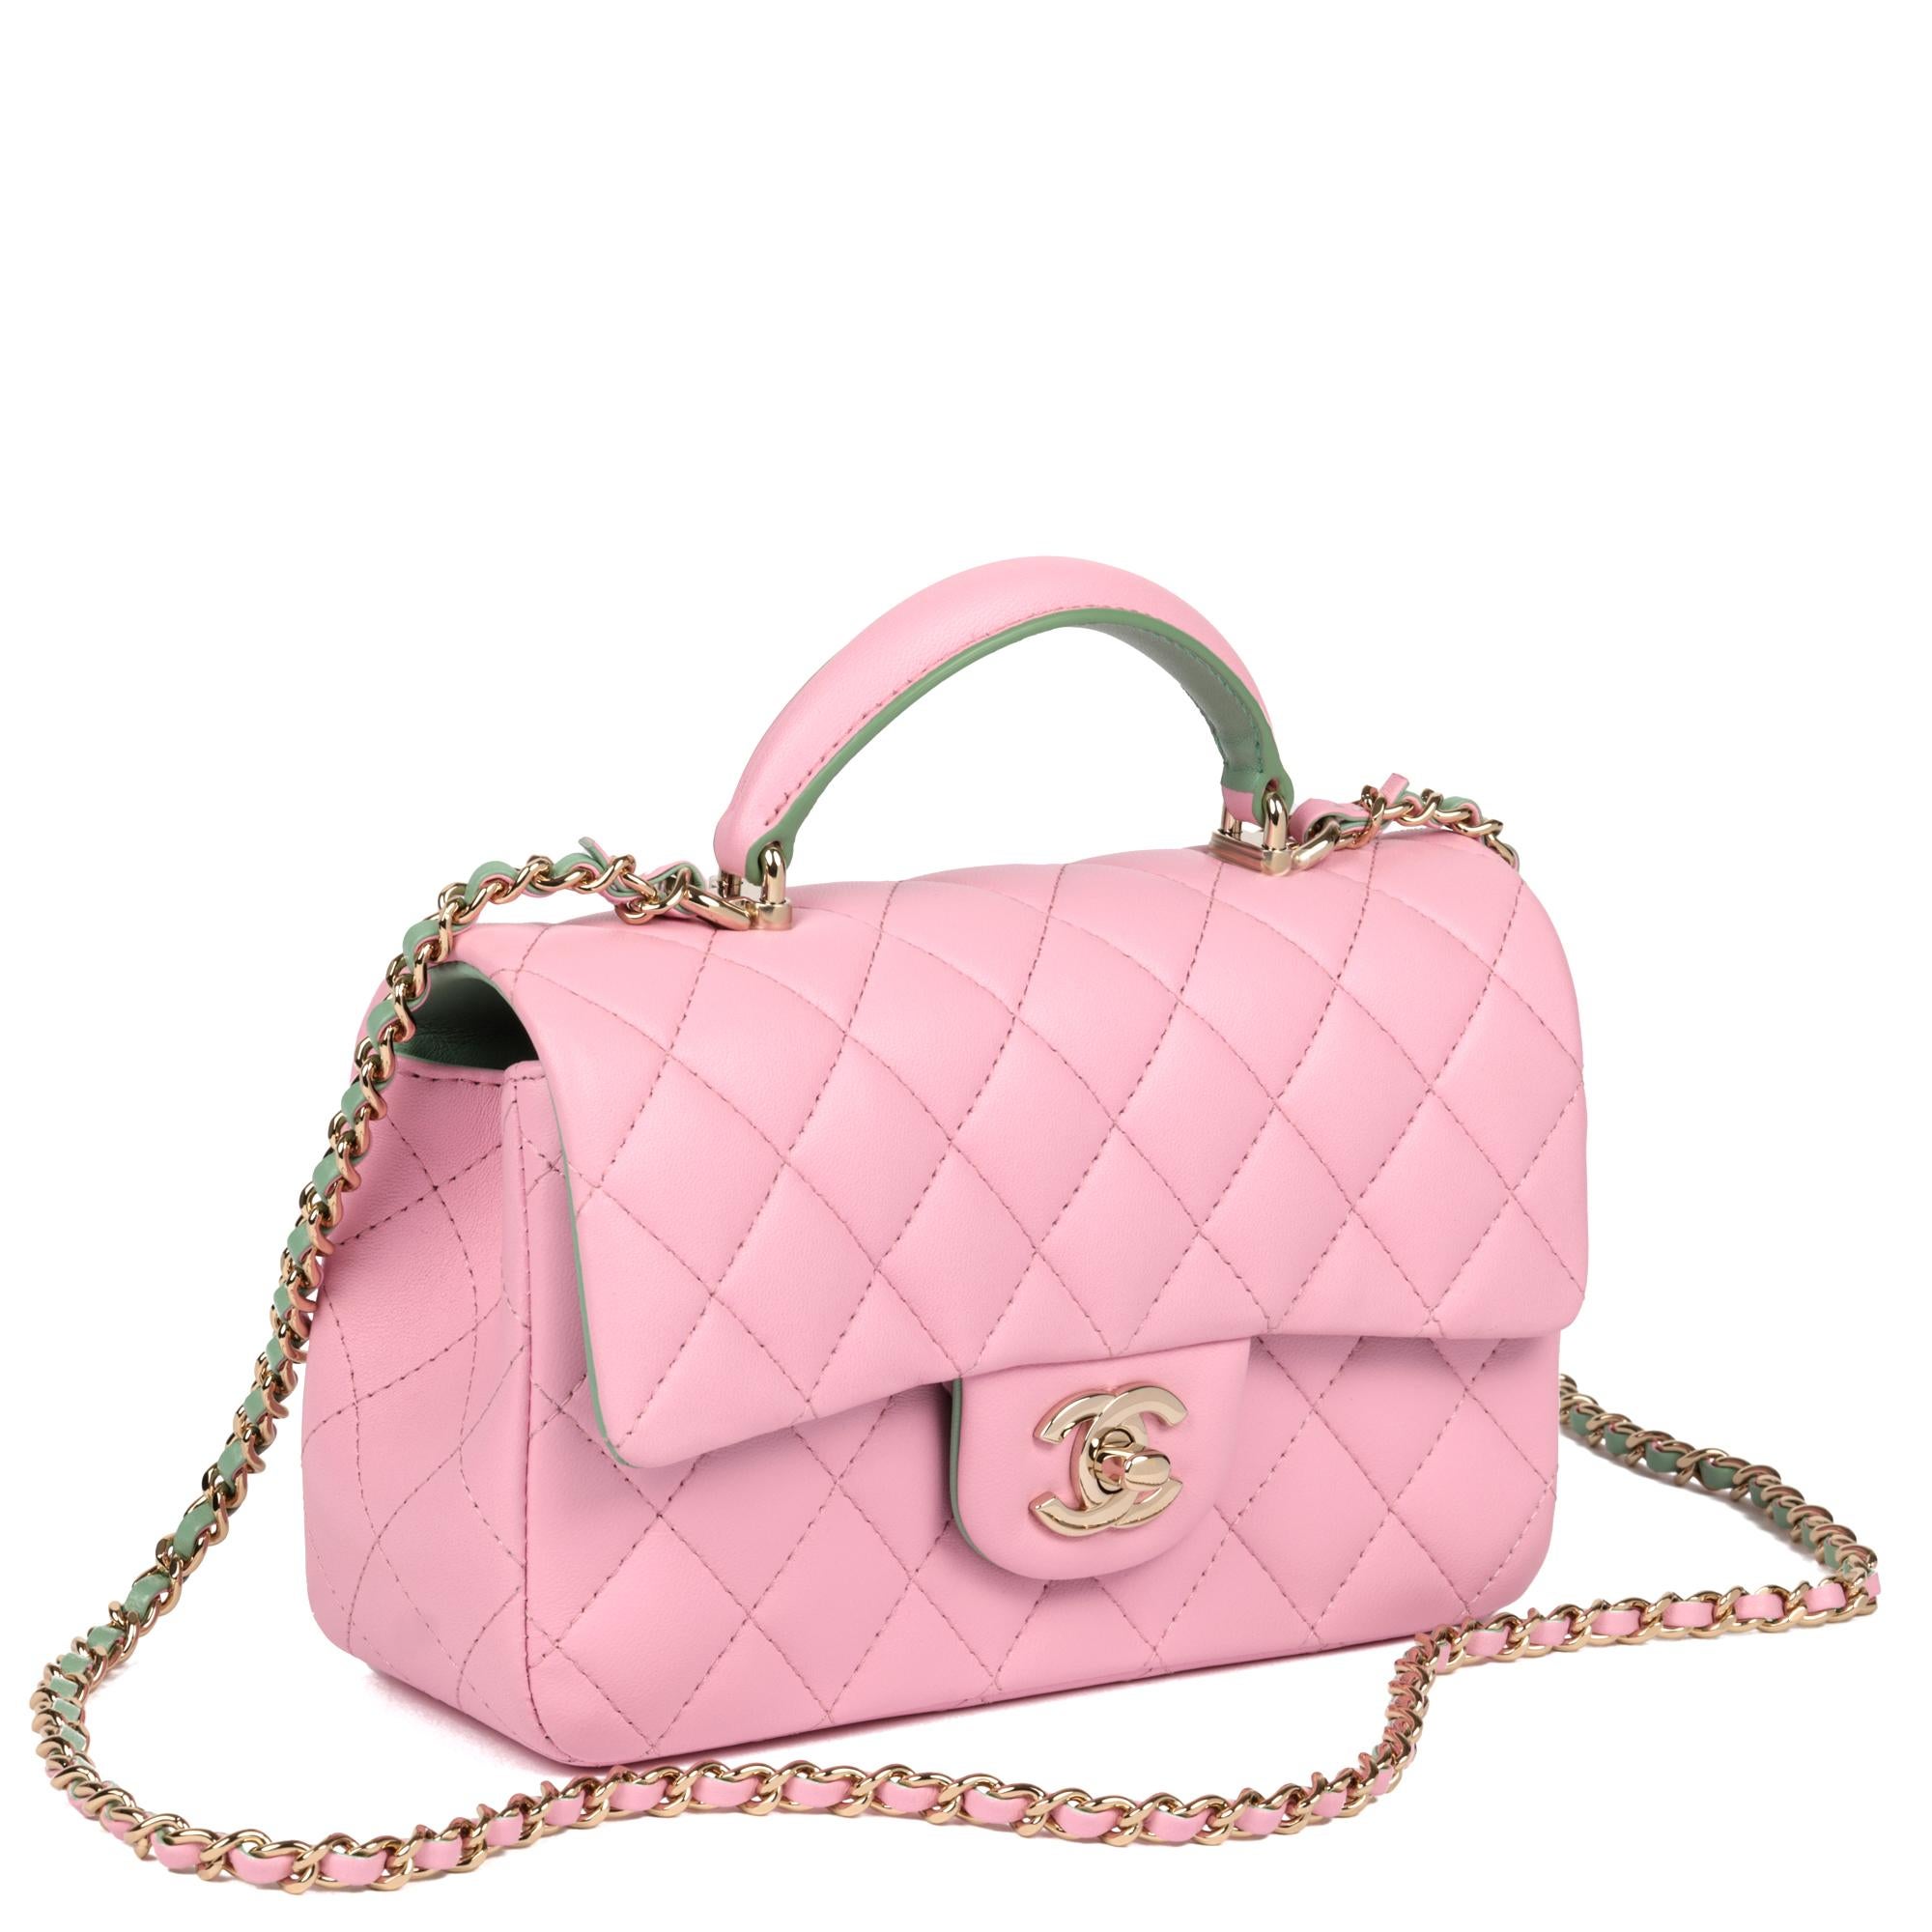 Chanel Pink & Green Quilted Lambskin Rectangular Mini Flap Bag with Top Handle

CONDITION NOTES
The exterior is exceptional condition with no signs of use.
The interior is in exceptional condition with no signs of use.
The hardware is in exceptional